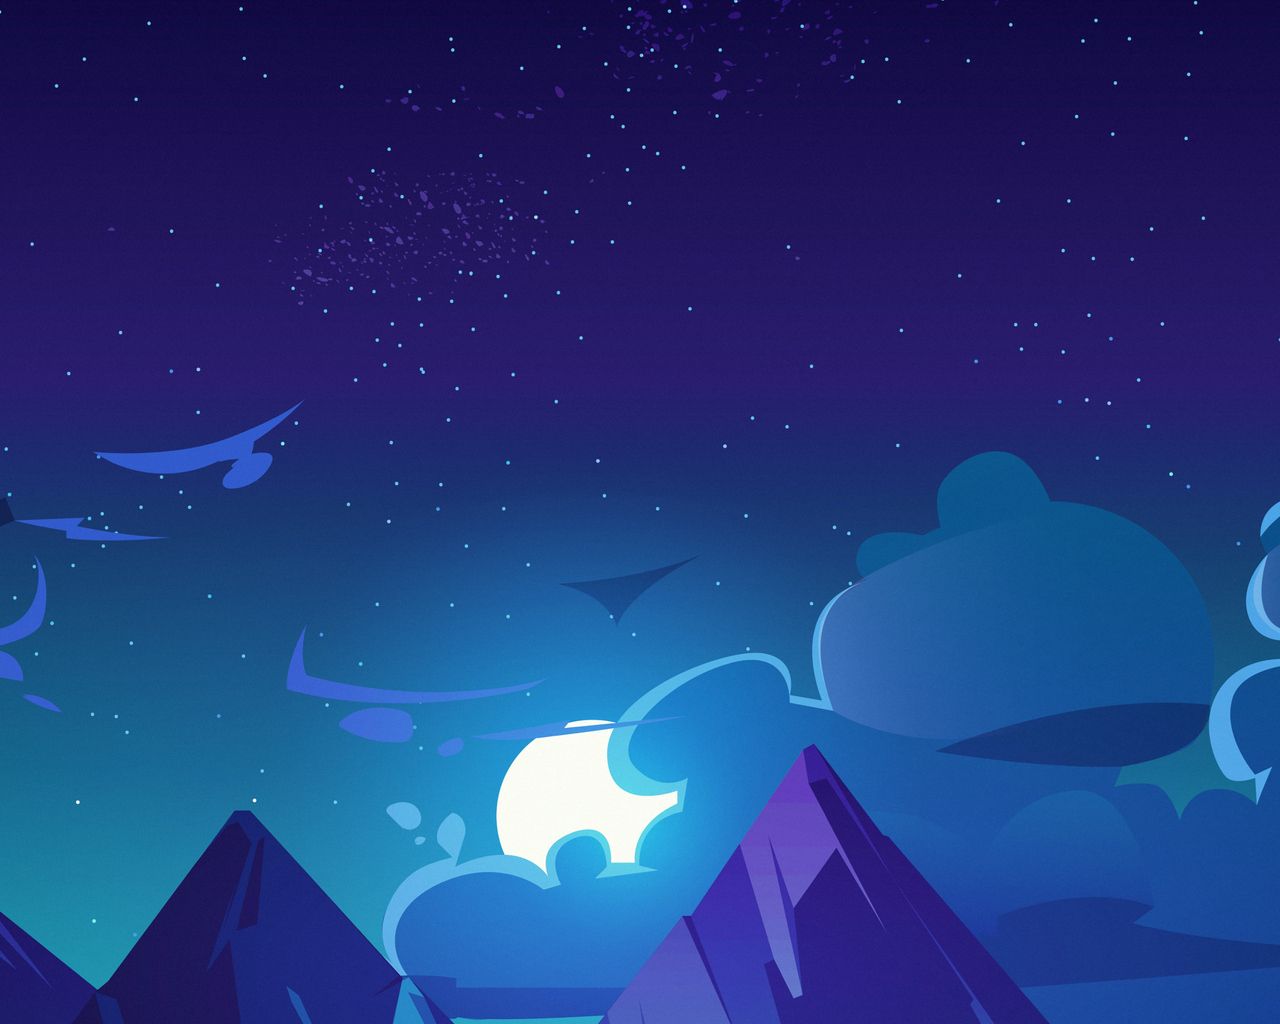 Download the Nighttime Sky Mountain Background vector free for your next project. - 1280x1024